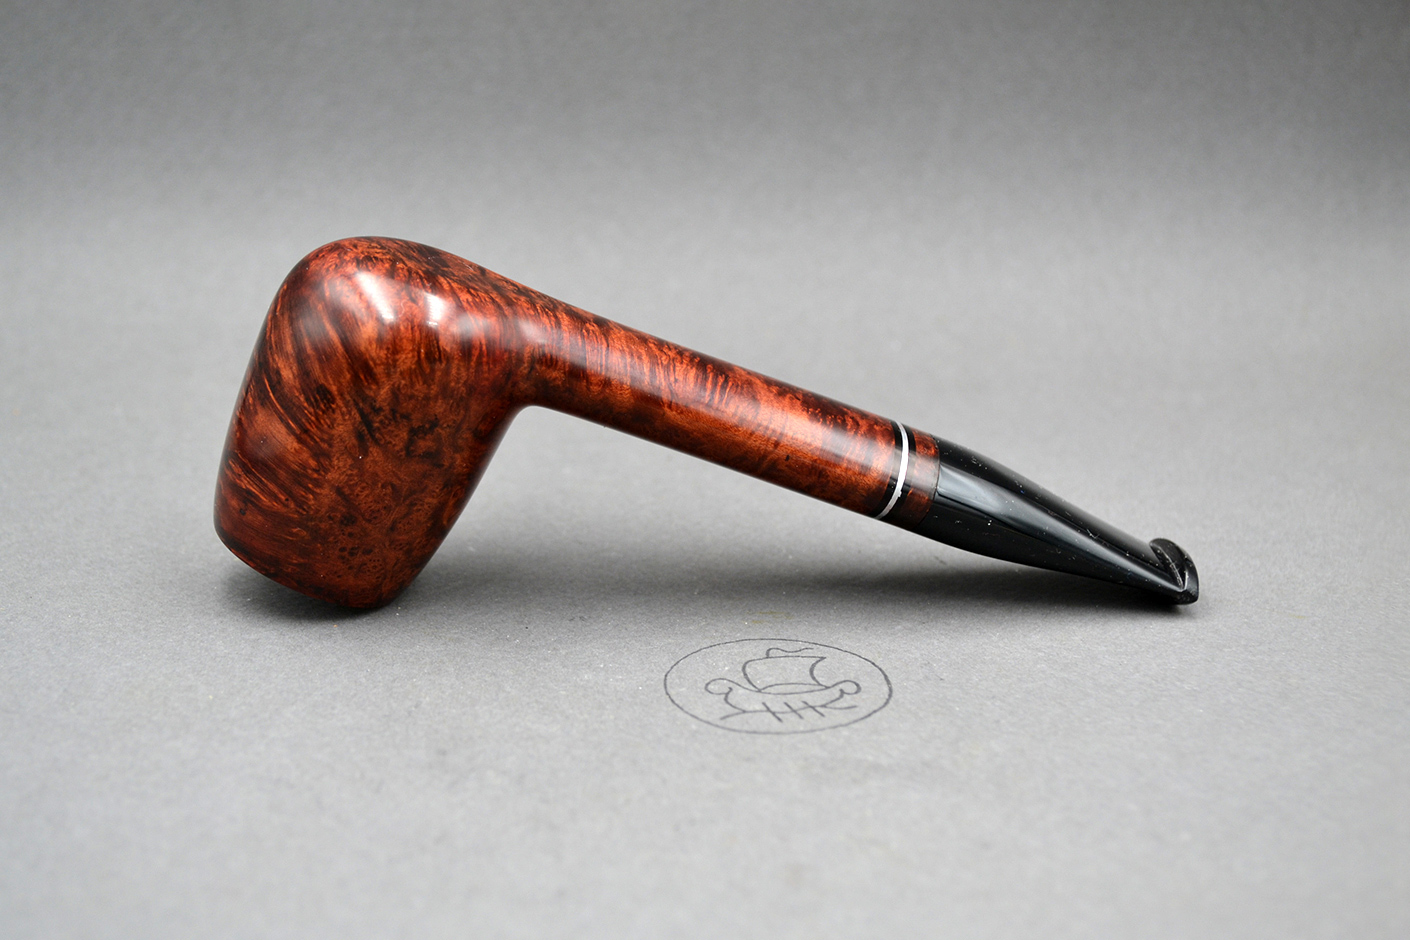 38mm 22256 handmade briar tobacco pipe constantinos zissis 0003